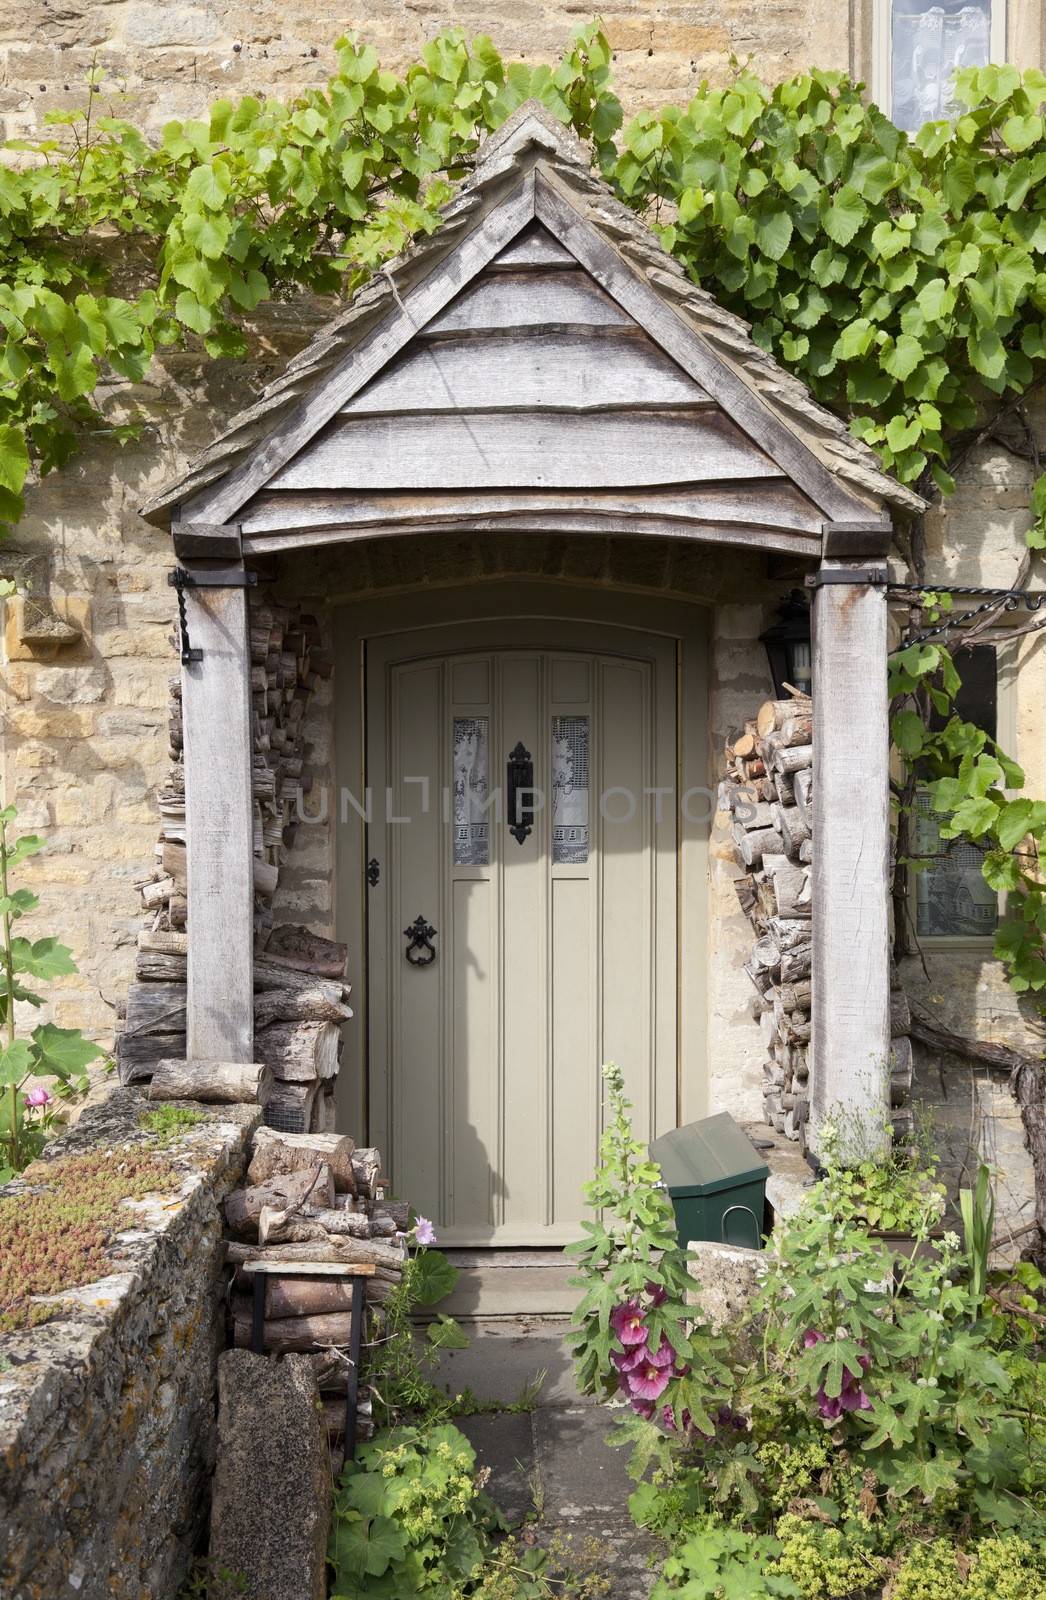 Pretty English cottage doorway with logs and flowers, Cotswolds, Gloucestershire, England.